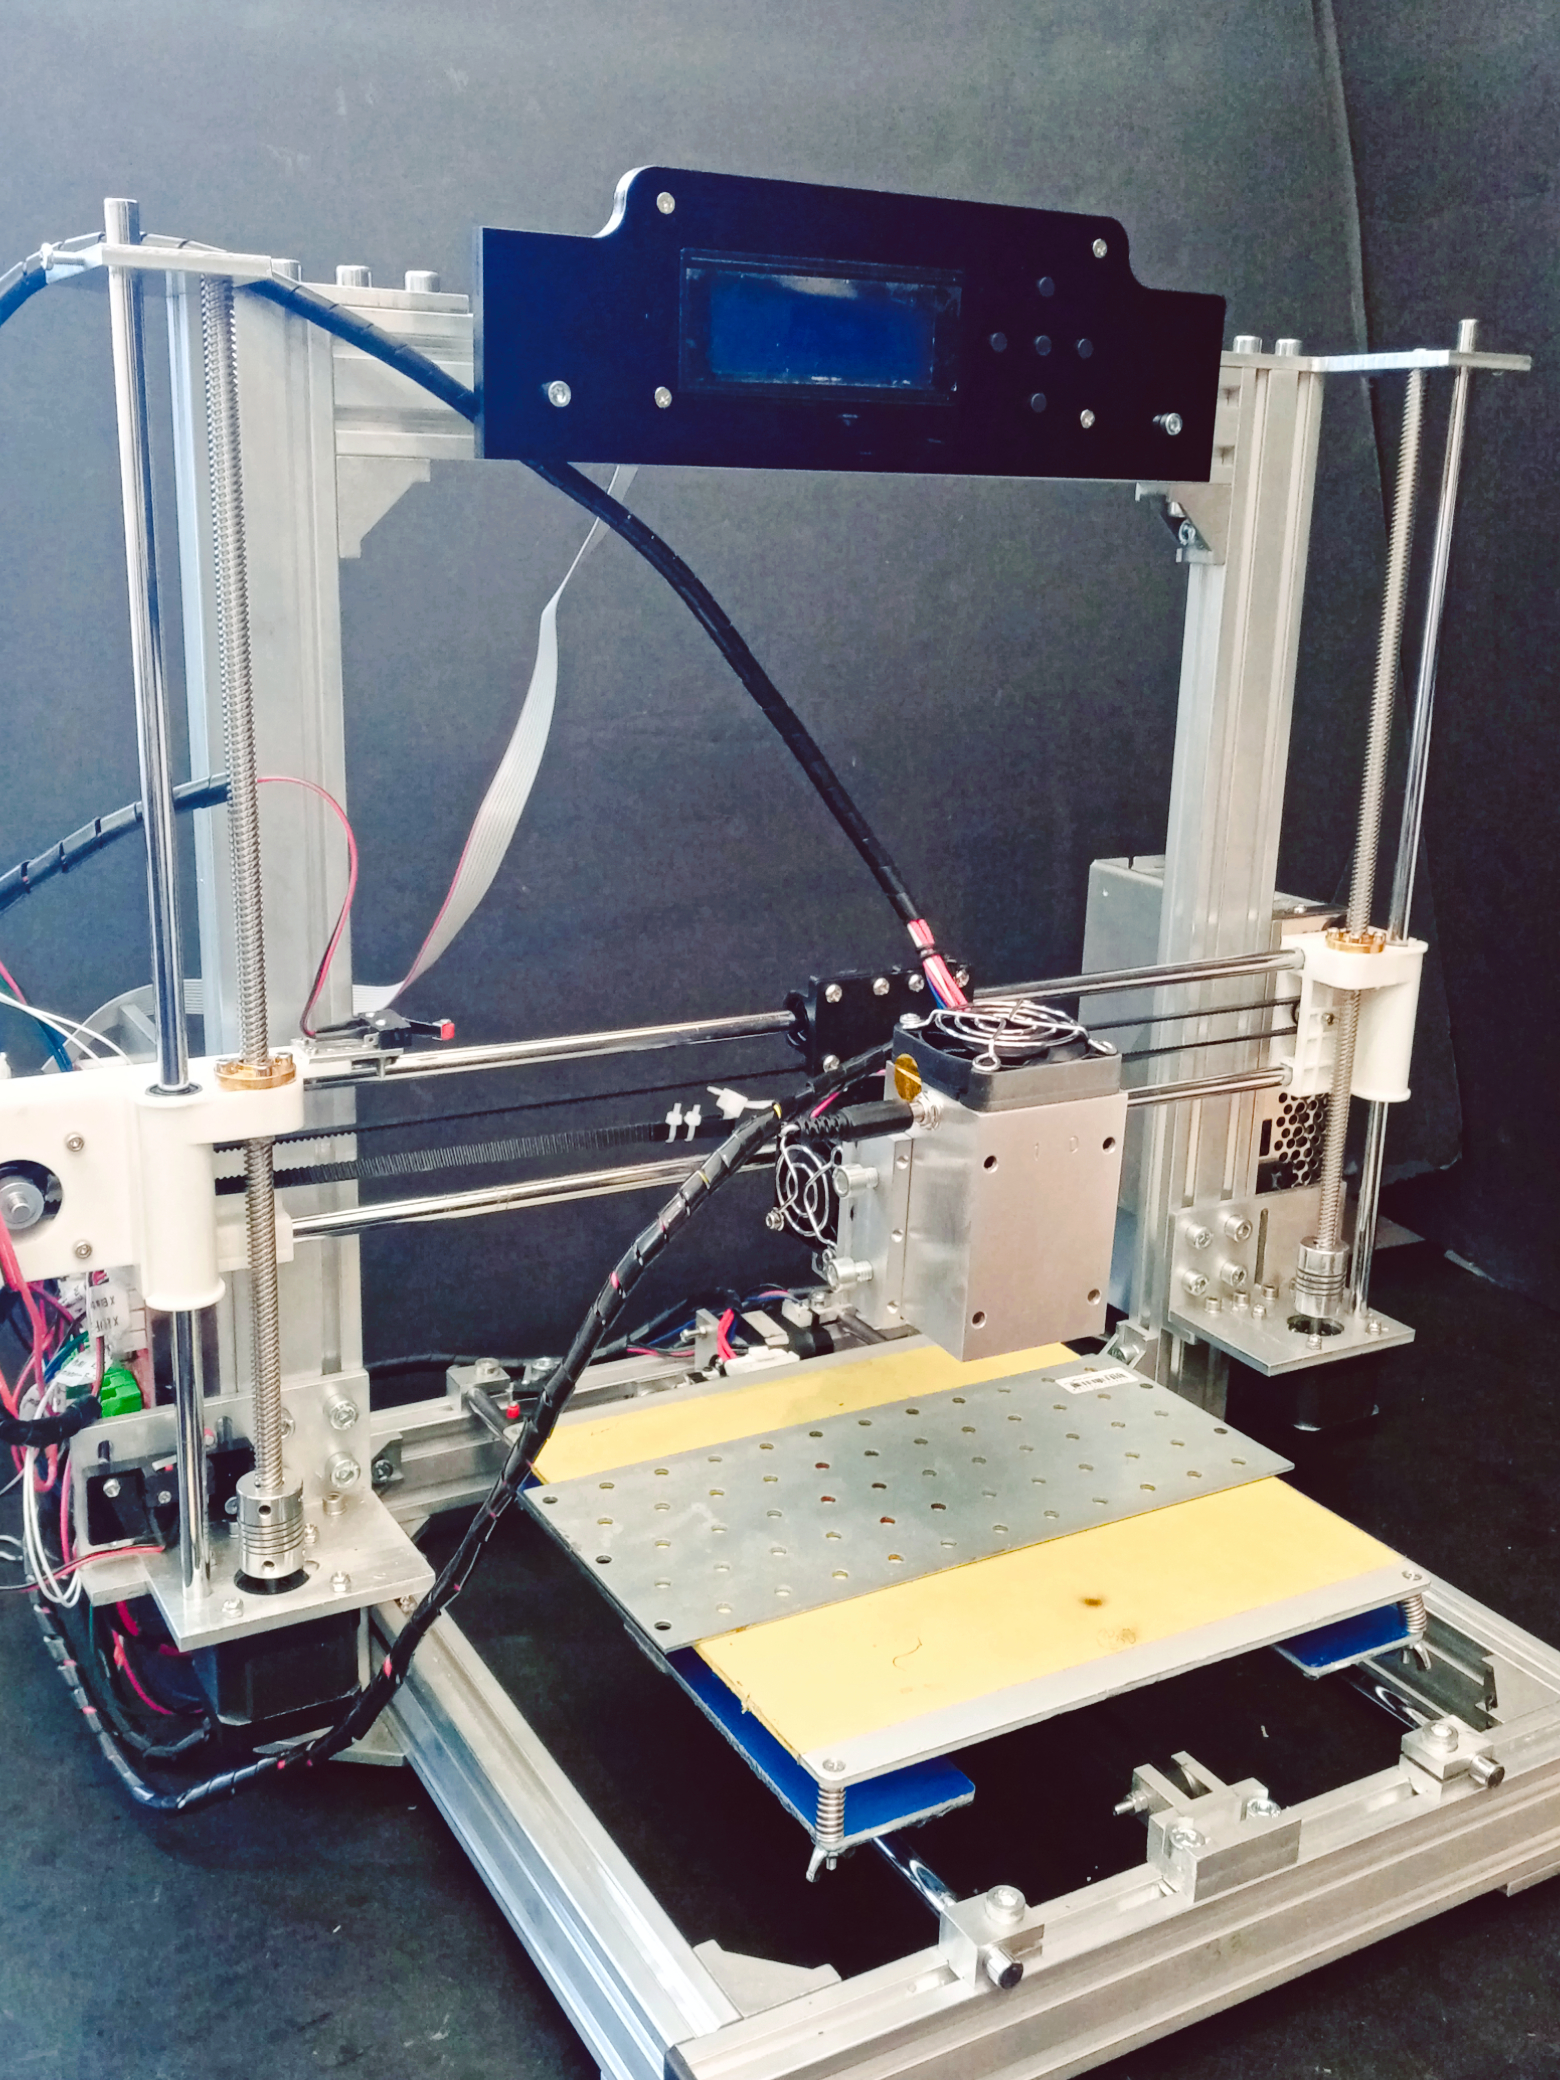 Compatible 3D printers with diode lasers